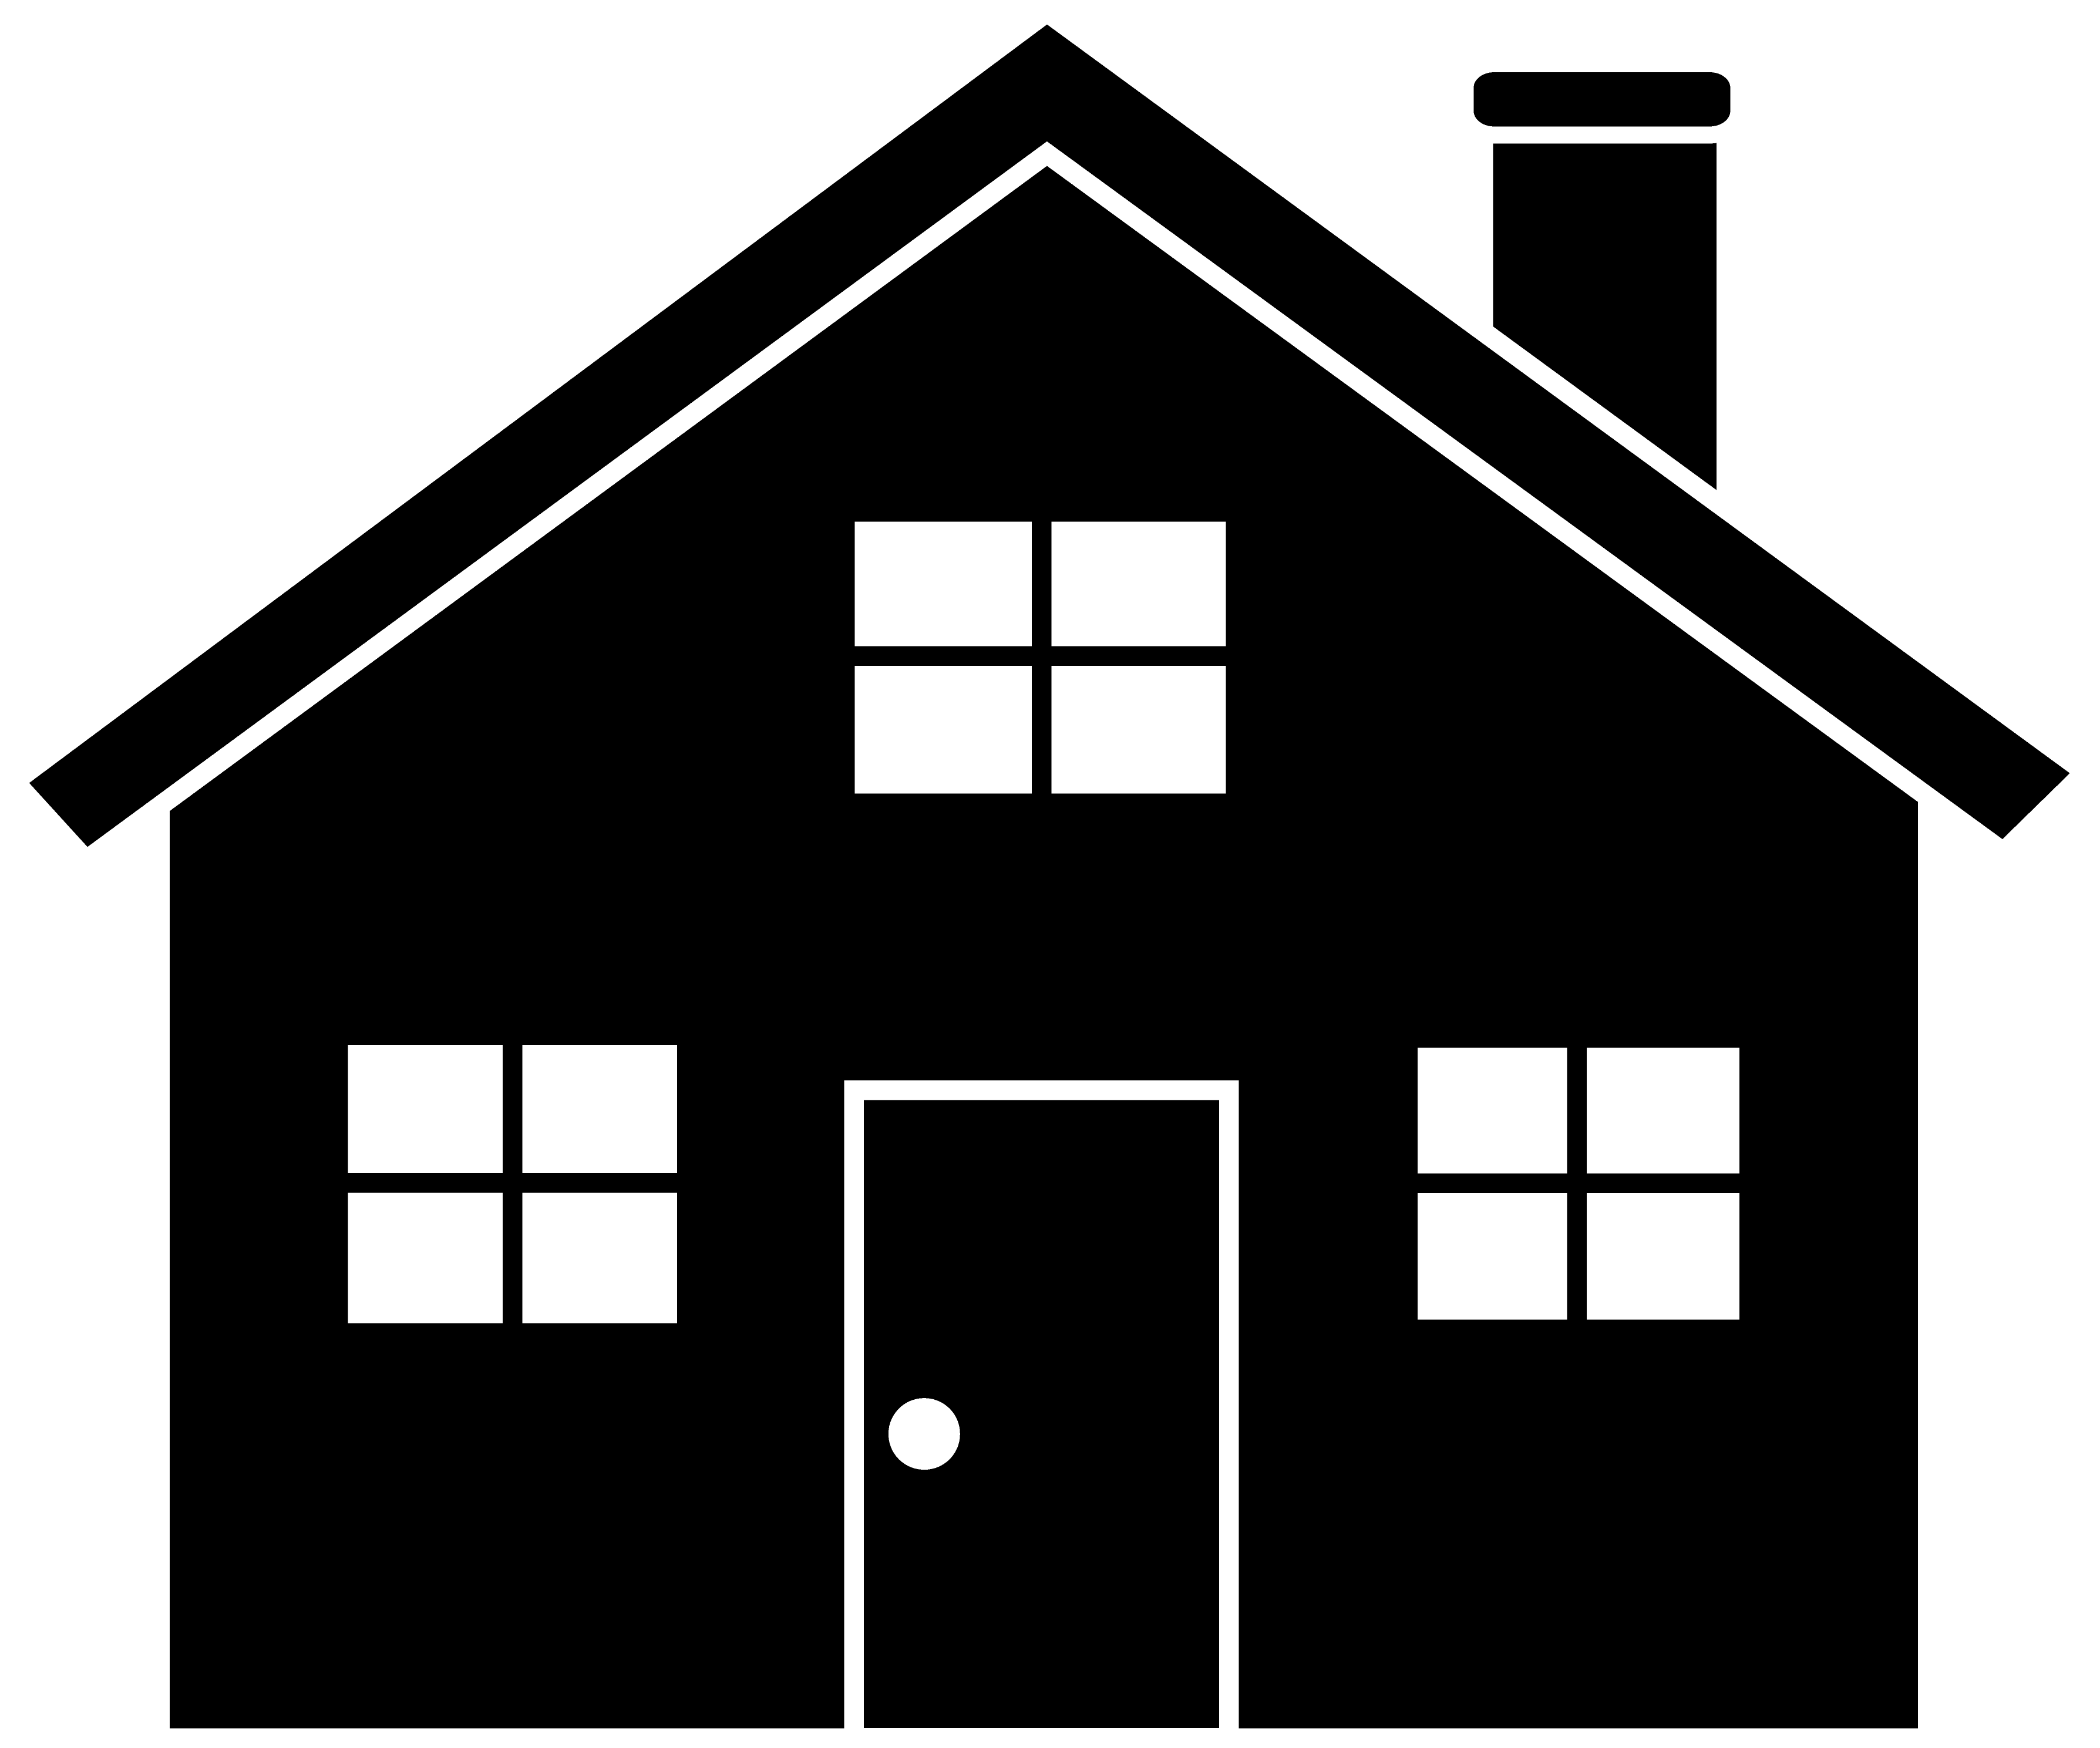 House silhouette png. Image of black background